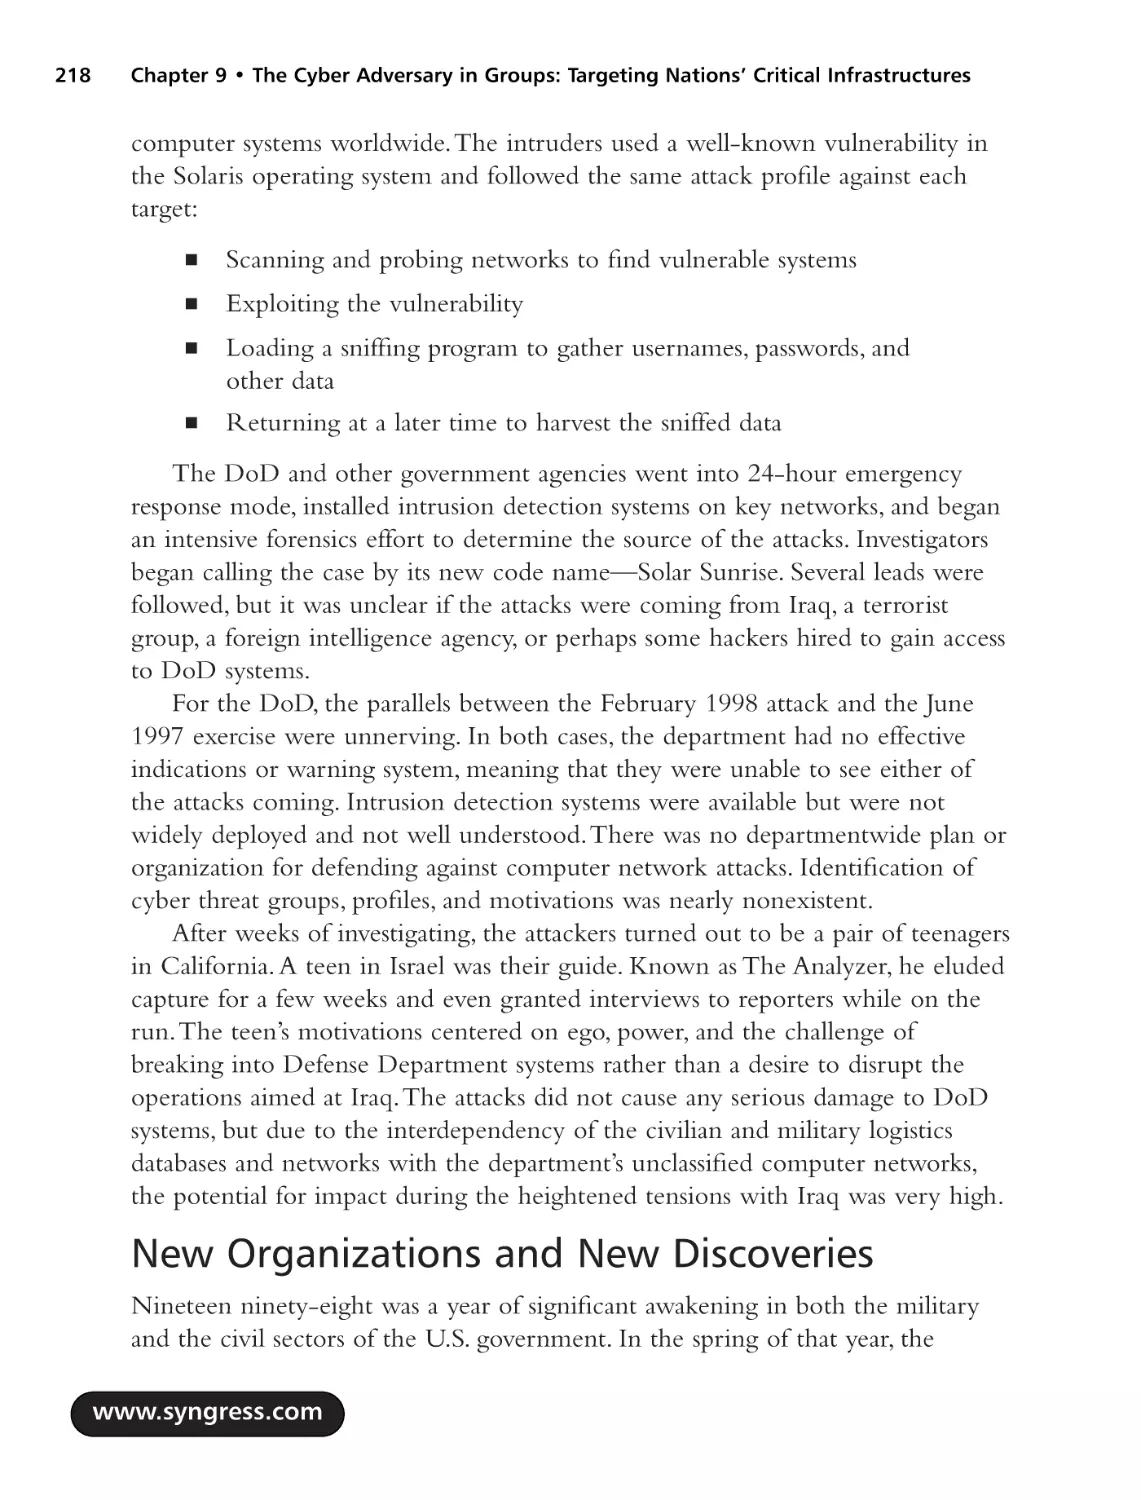 New Organizations and New Discoveries